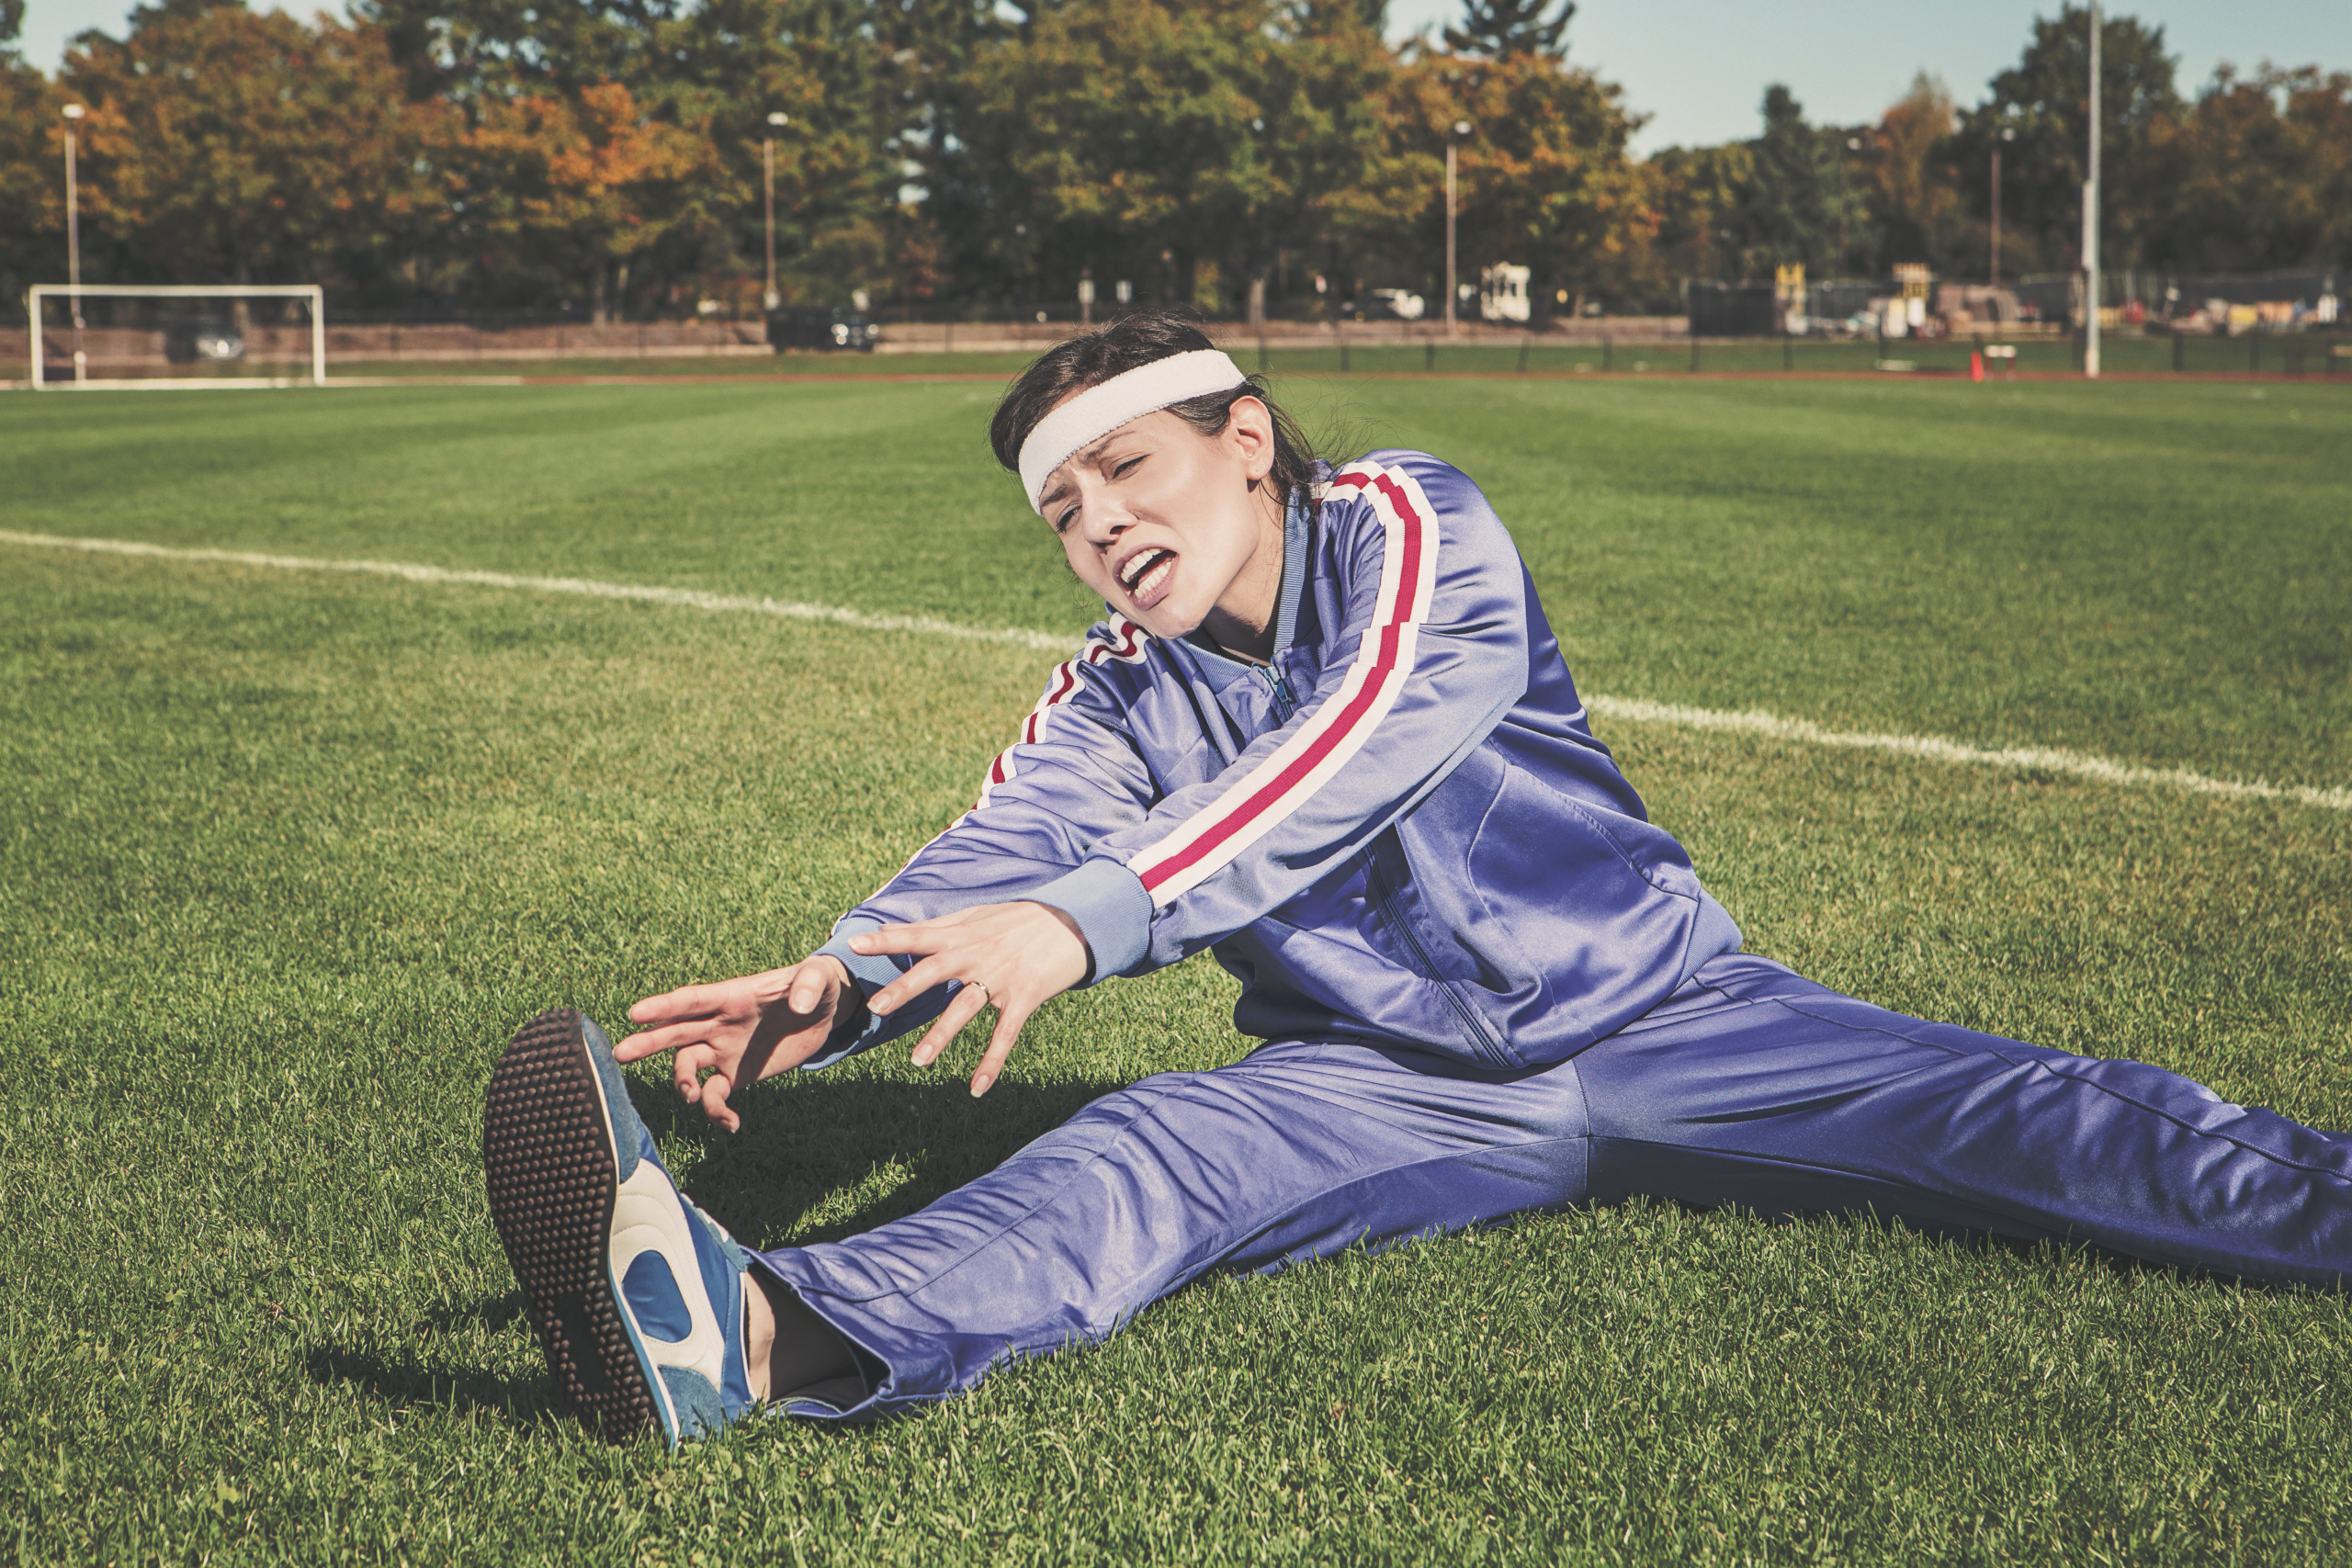 female wearing a blue track suit sitting on green sports field stretching with a pained look on her face